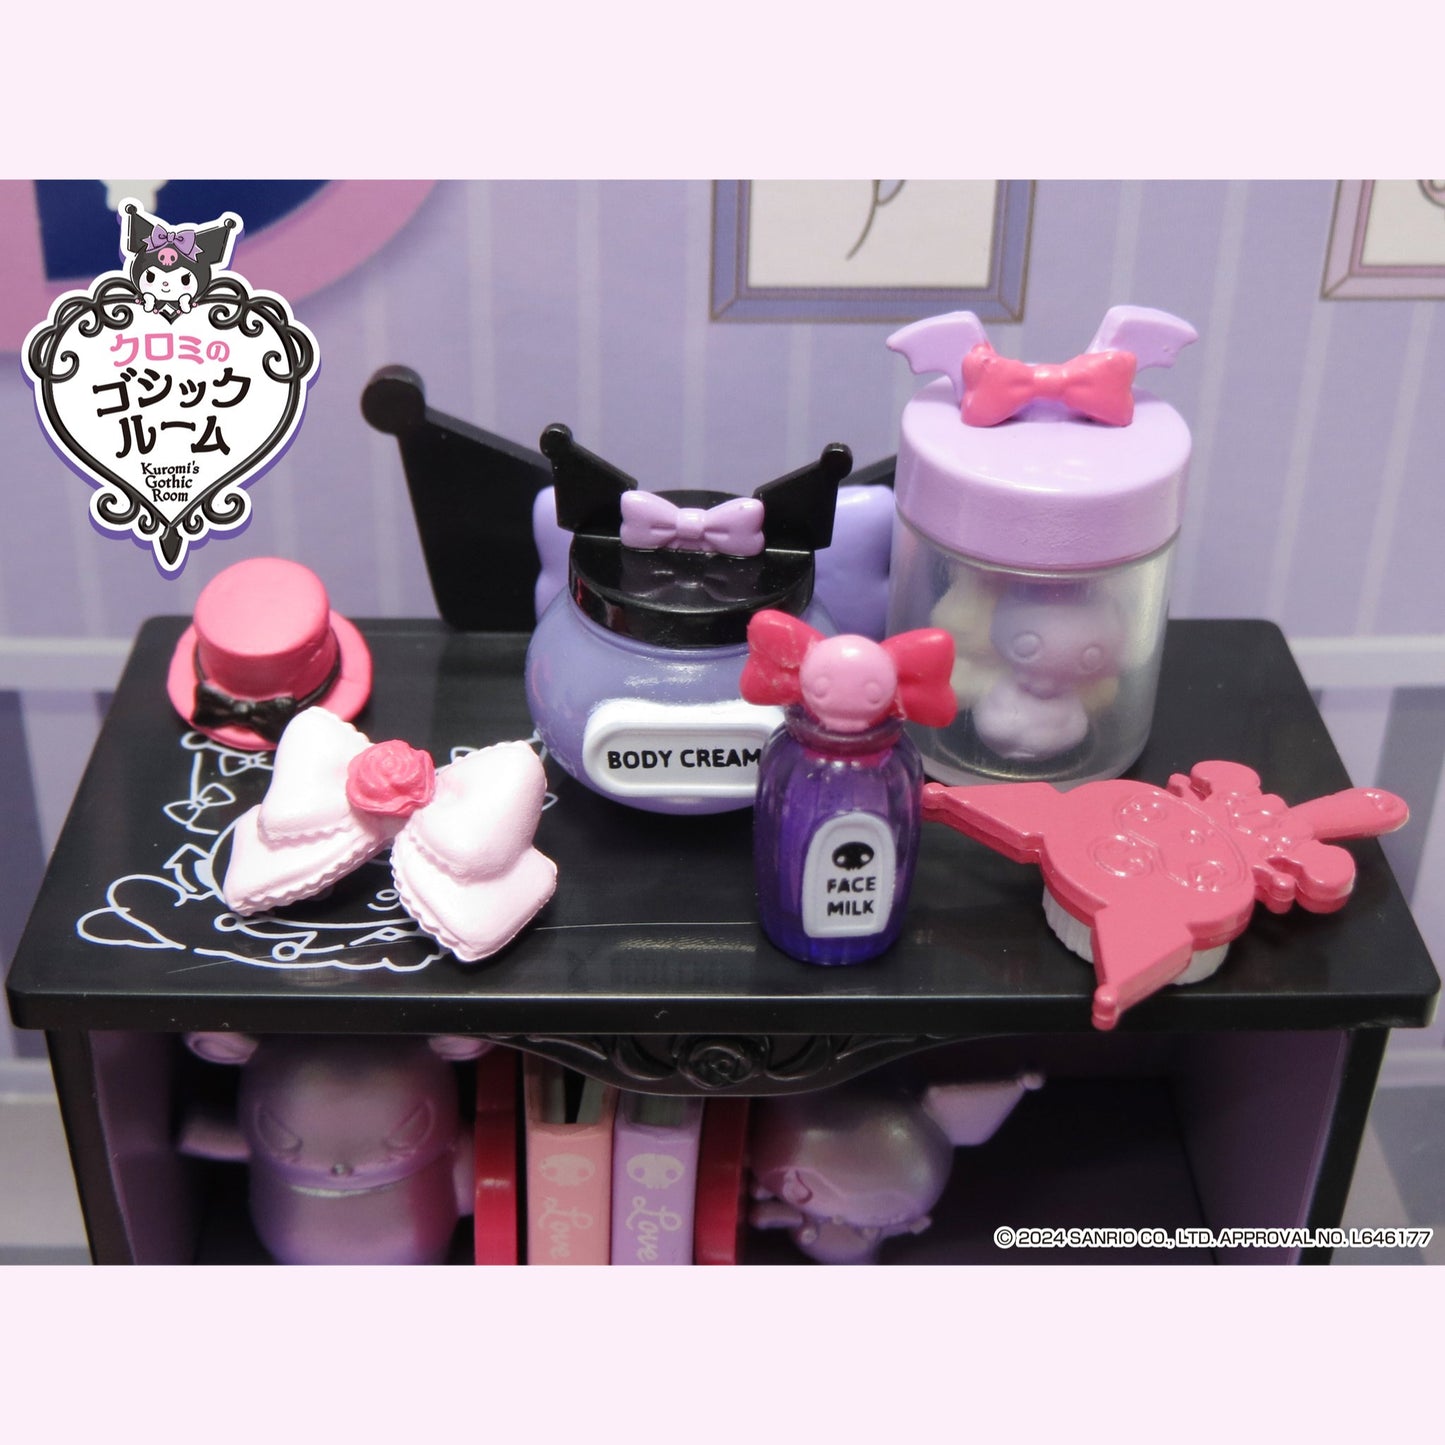 [Order] Rement Kuromi Gothic Room miniature furniture (Complete set)